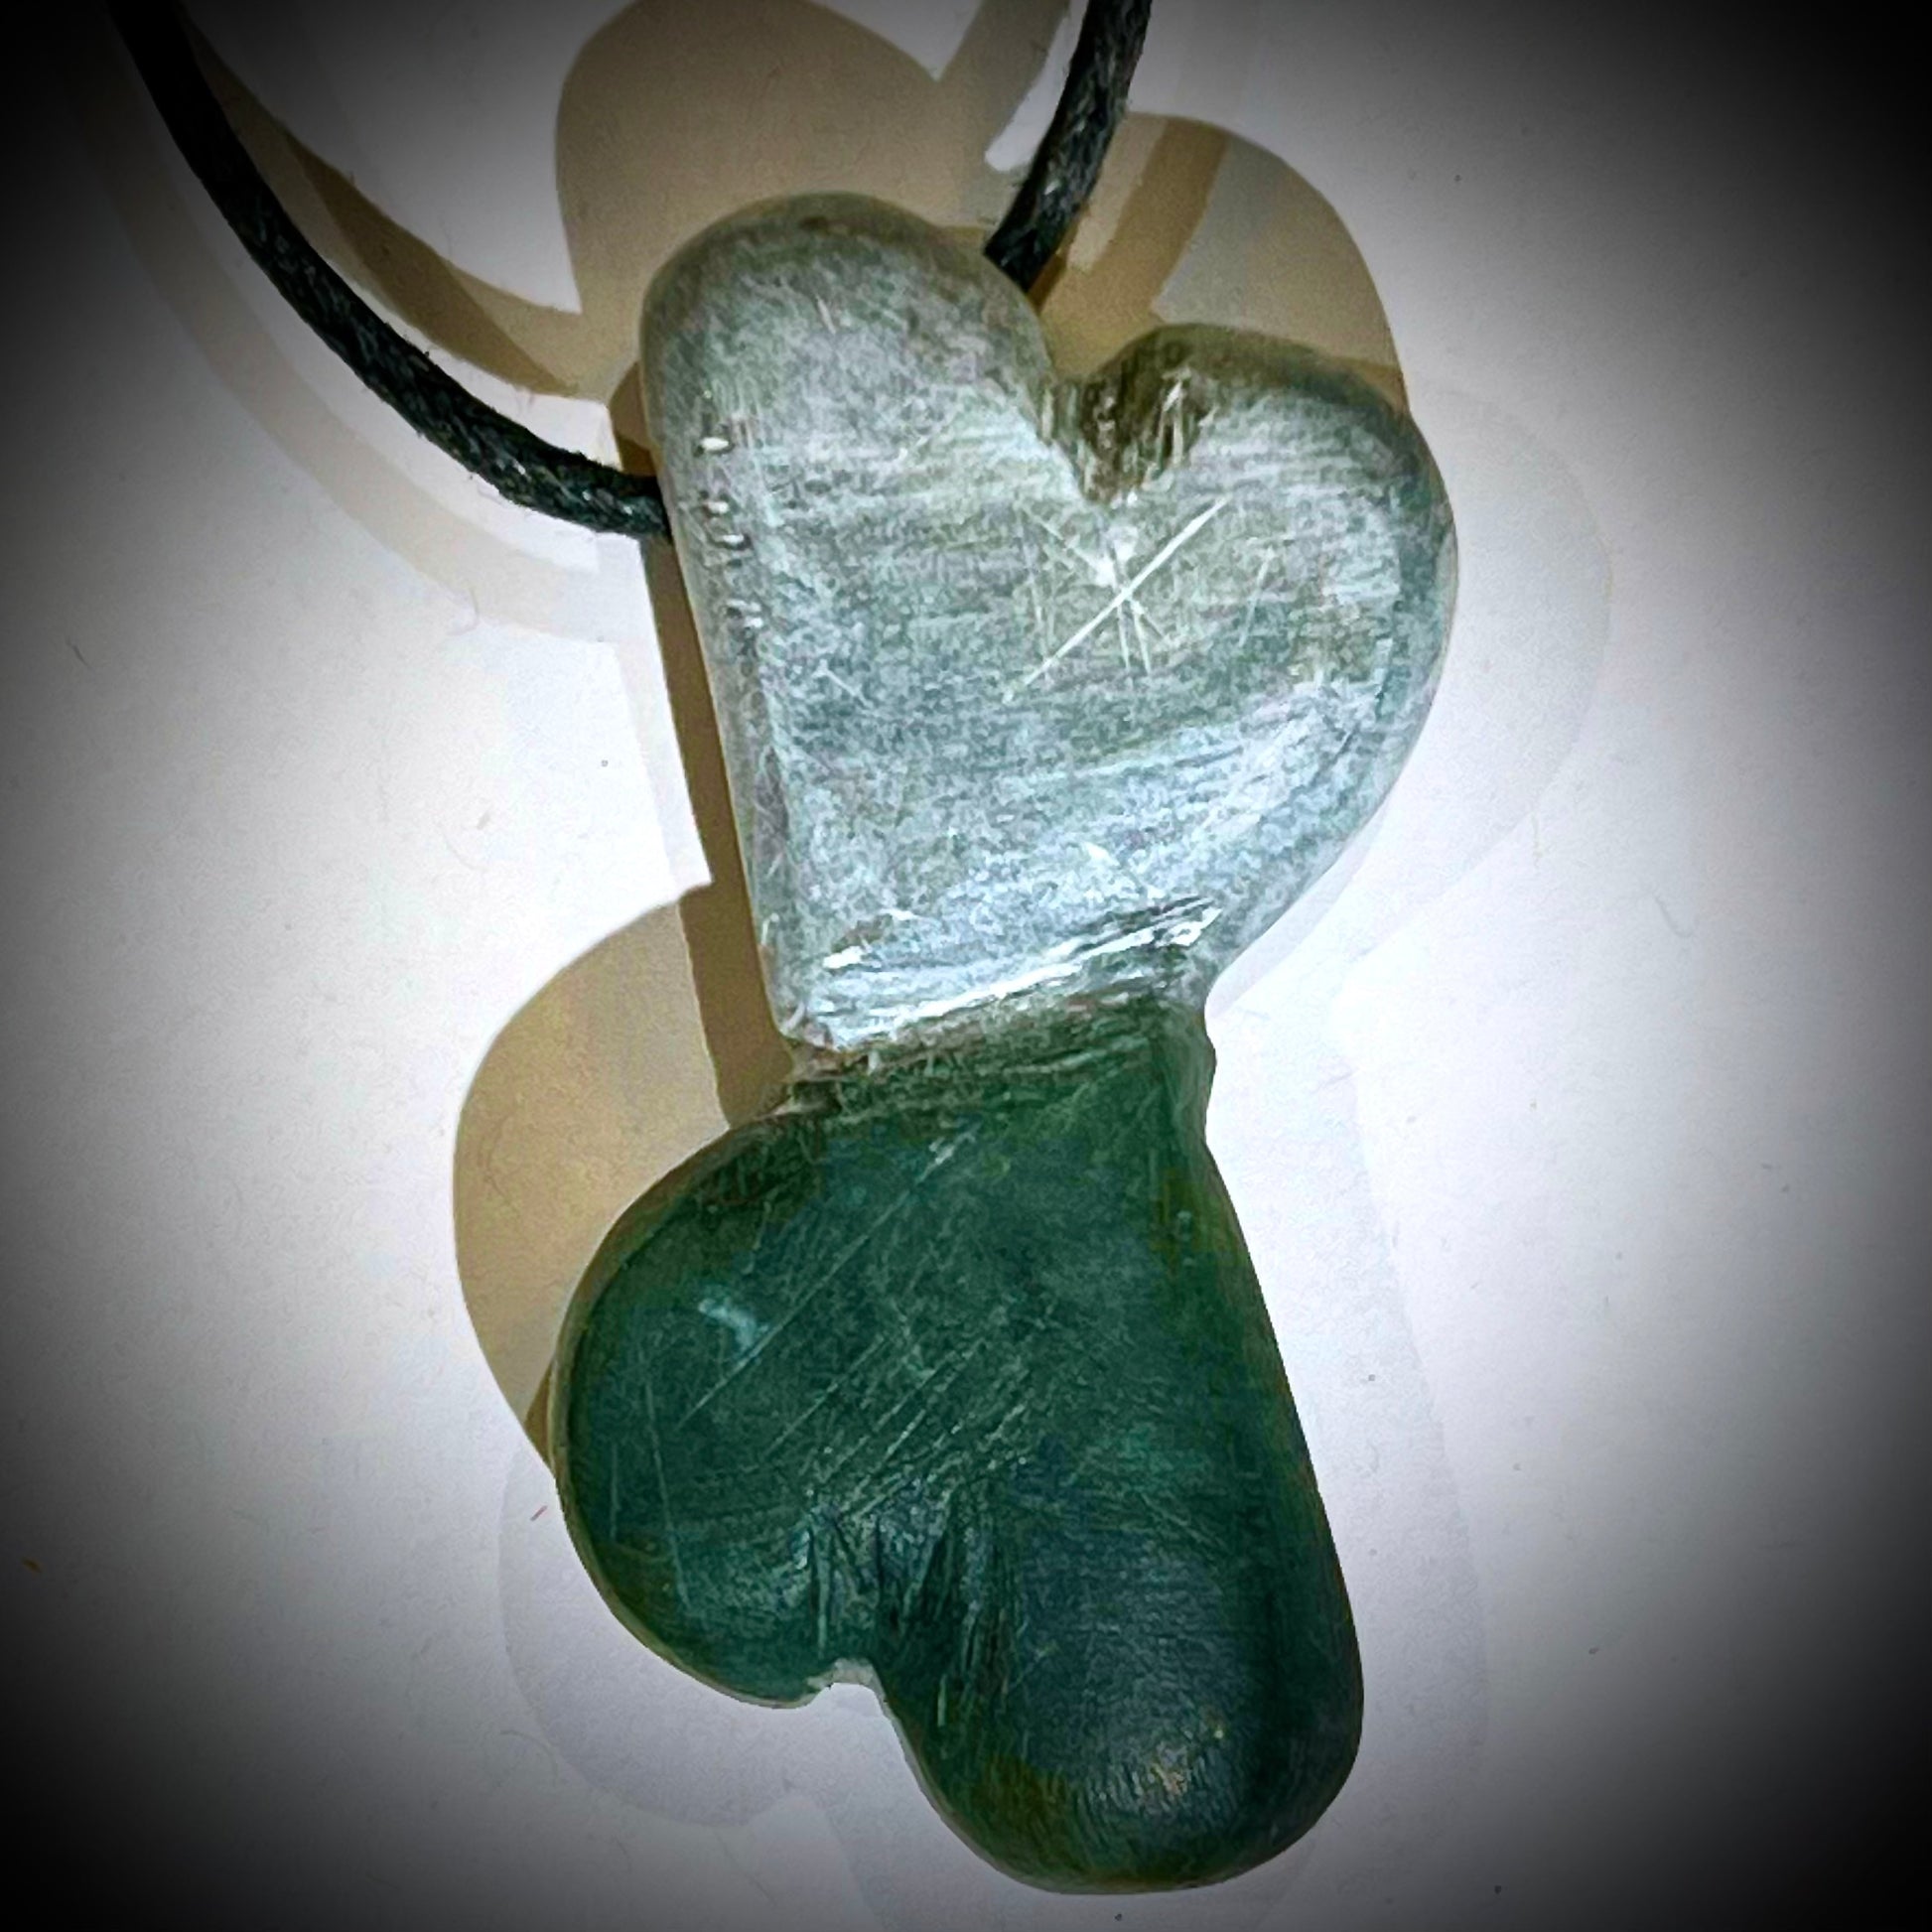 Fun for kids and adults this art class double heart pendant at Fathom Stone Art is a daily art class activity fun for the whole family.